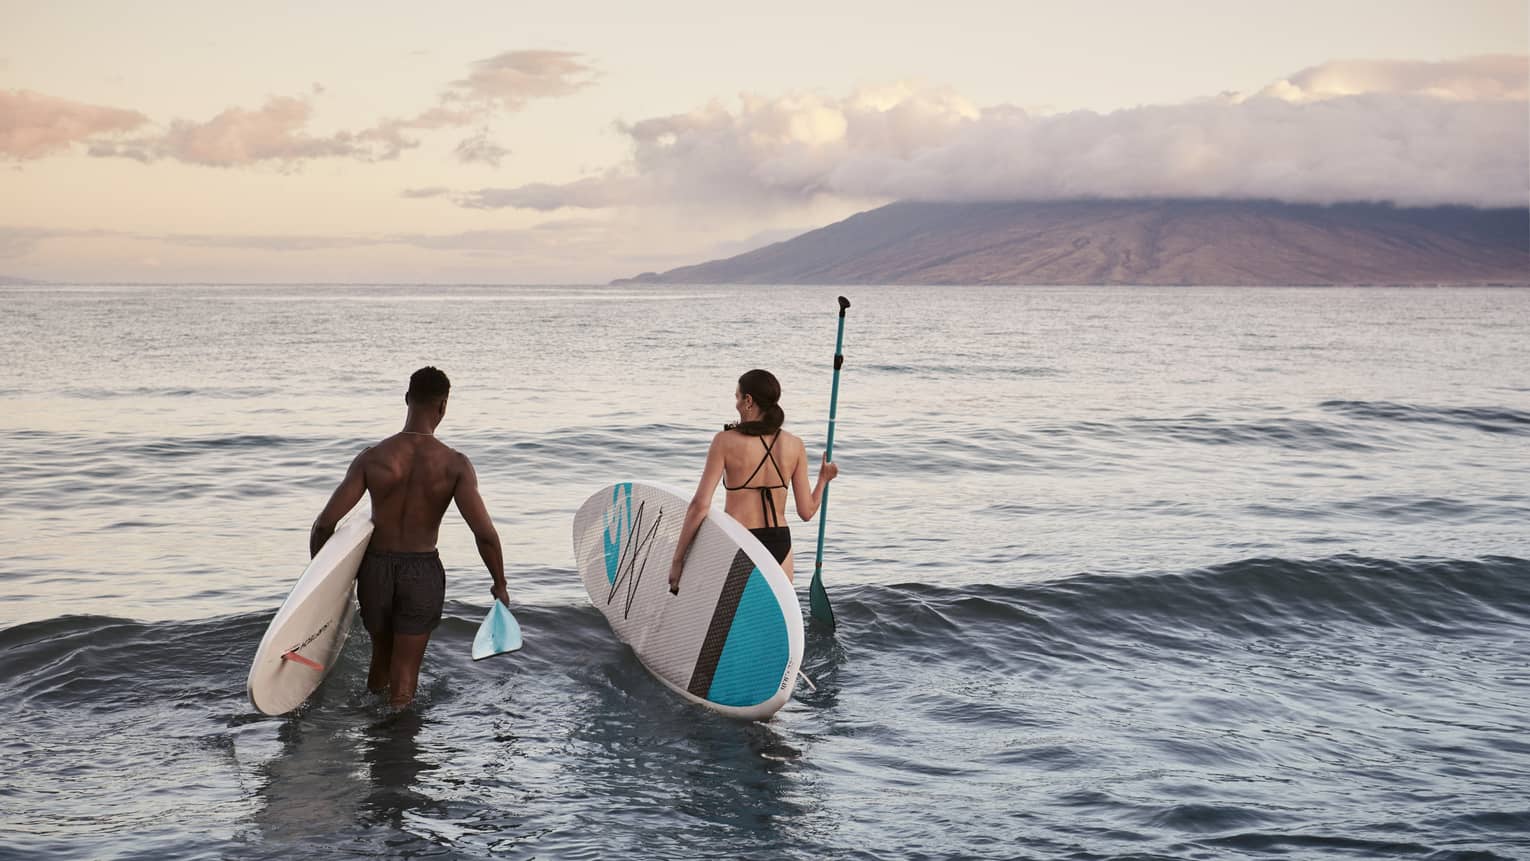 Man and woman carry SUP paddleboards into ocean in Maui